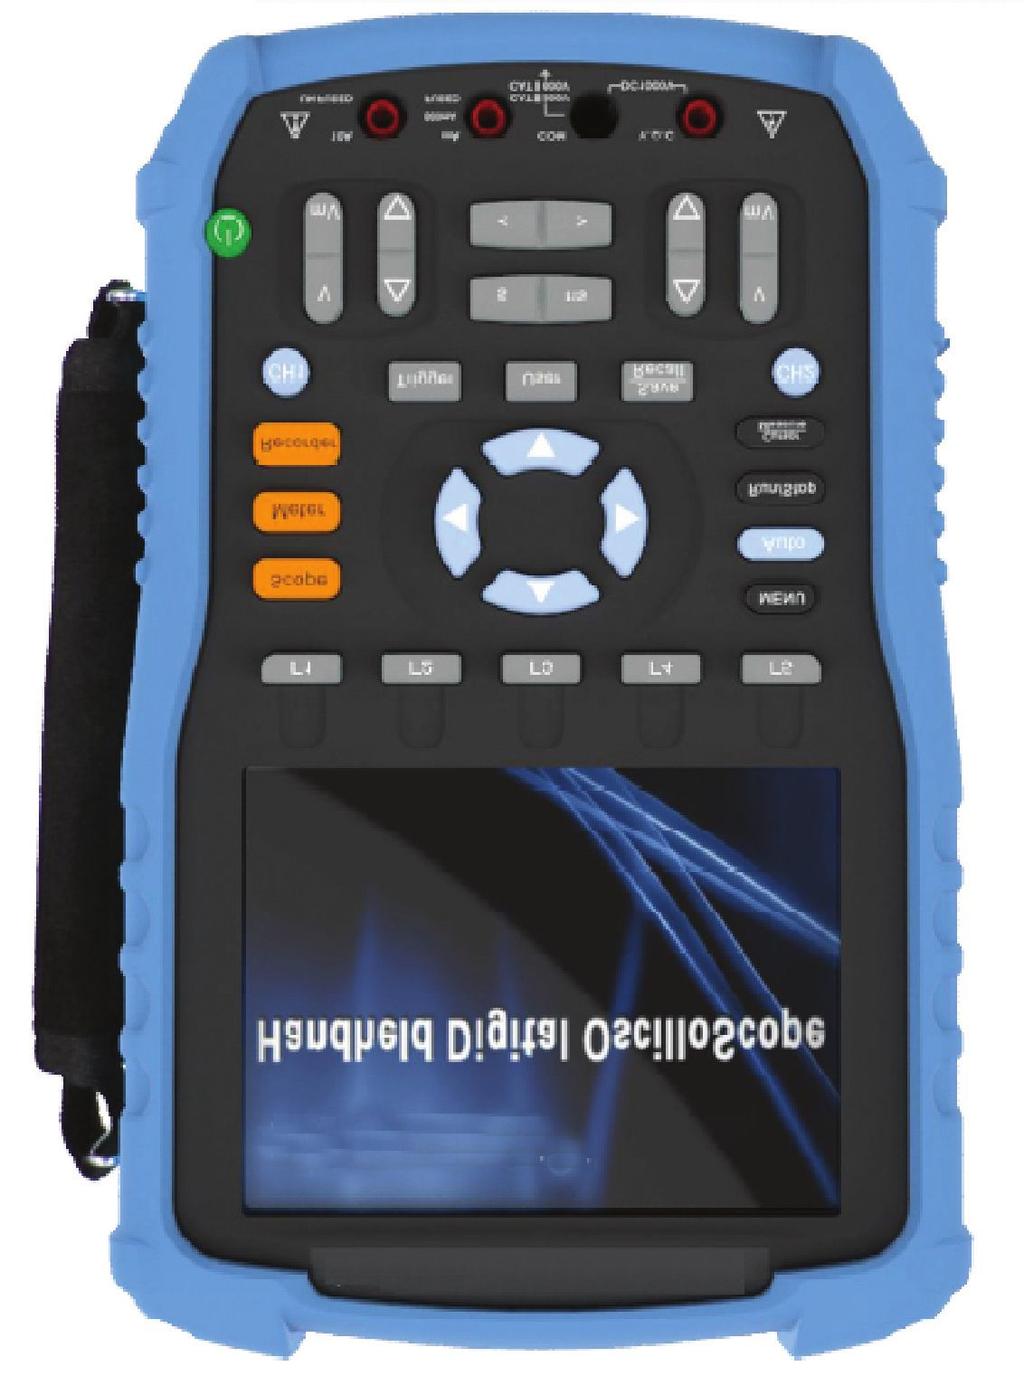 SHO800 Series Handheld Digital Oscilloscope SHO810 100MHz 1GSa/s Handheld Digital Oscilloscope Application Domain Outdoor measure Circuit measure Wind power, PV power and other new energy